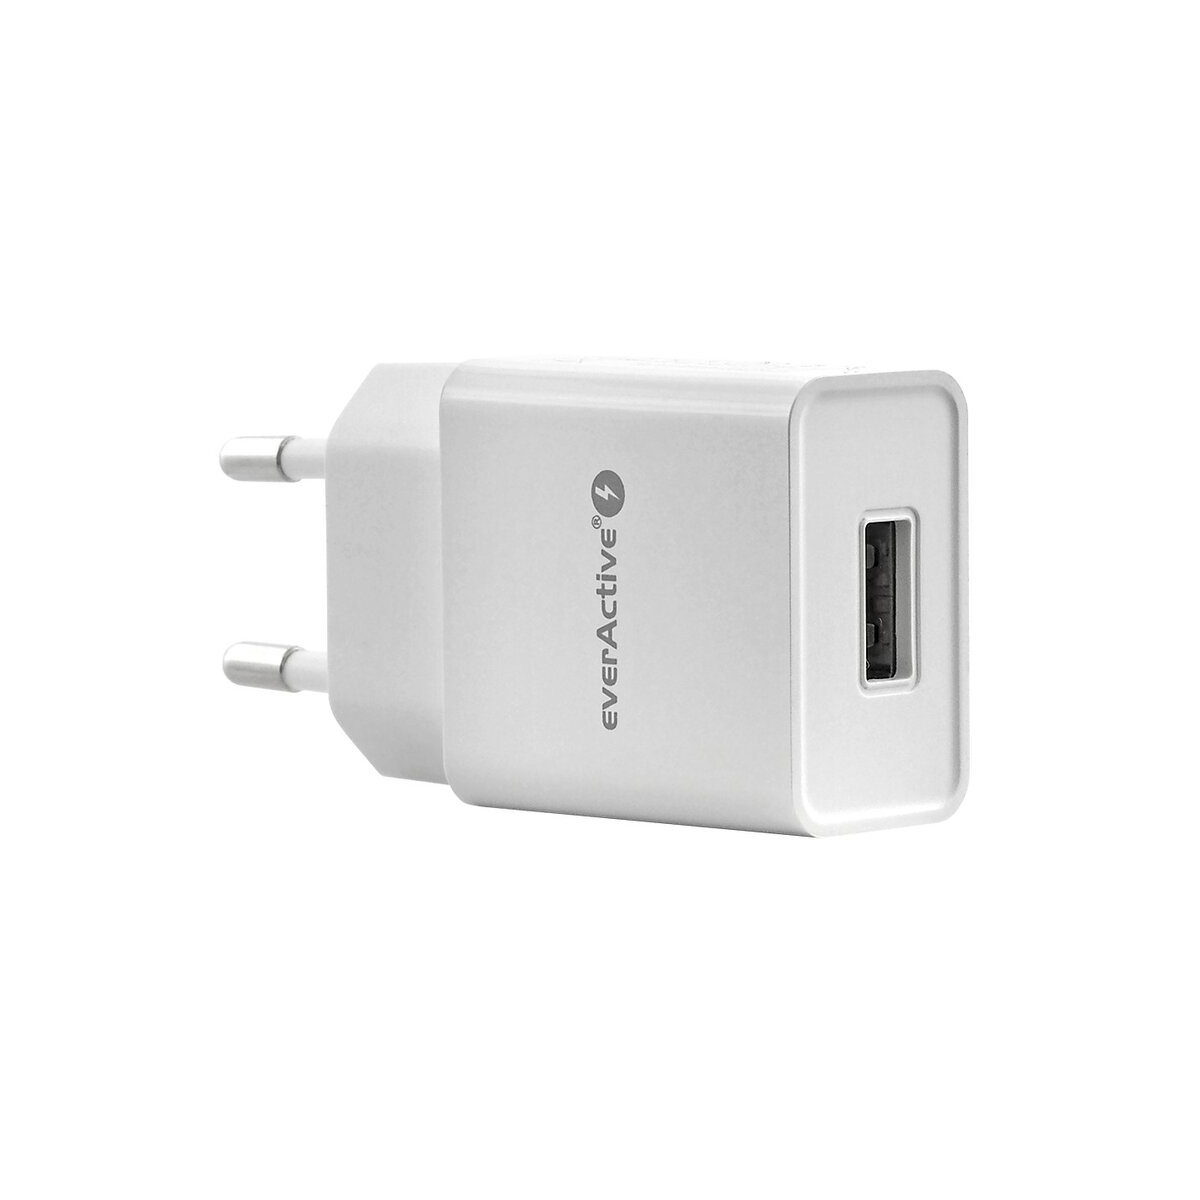 Chargeur allume cigare 2 prises USB 2,4A - Energizer